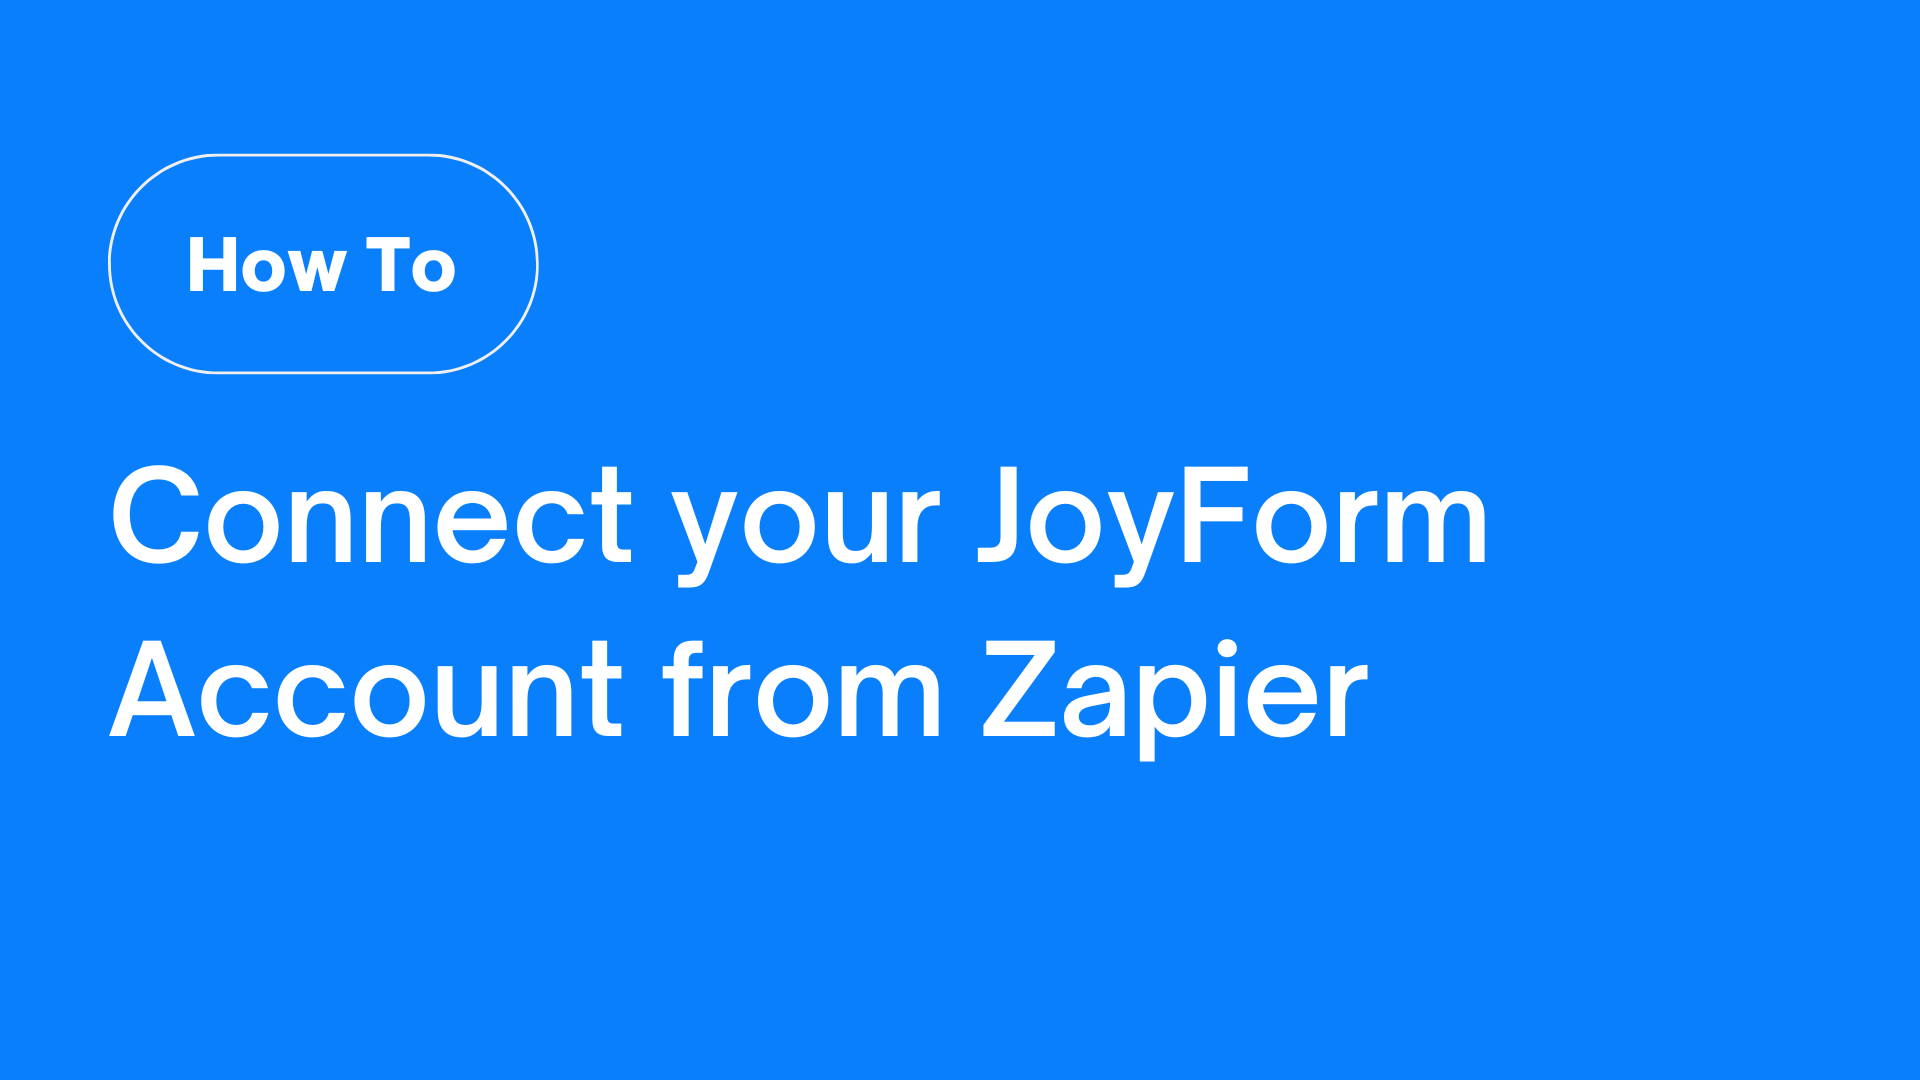 [How To] Connect Your JoyForm Account on Zapier